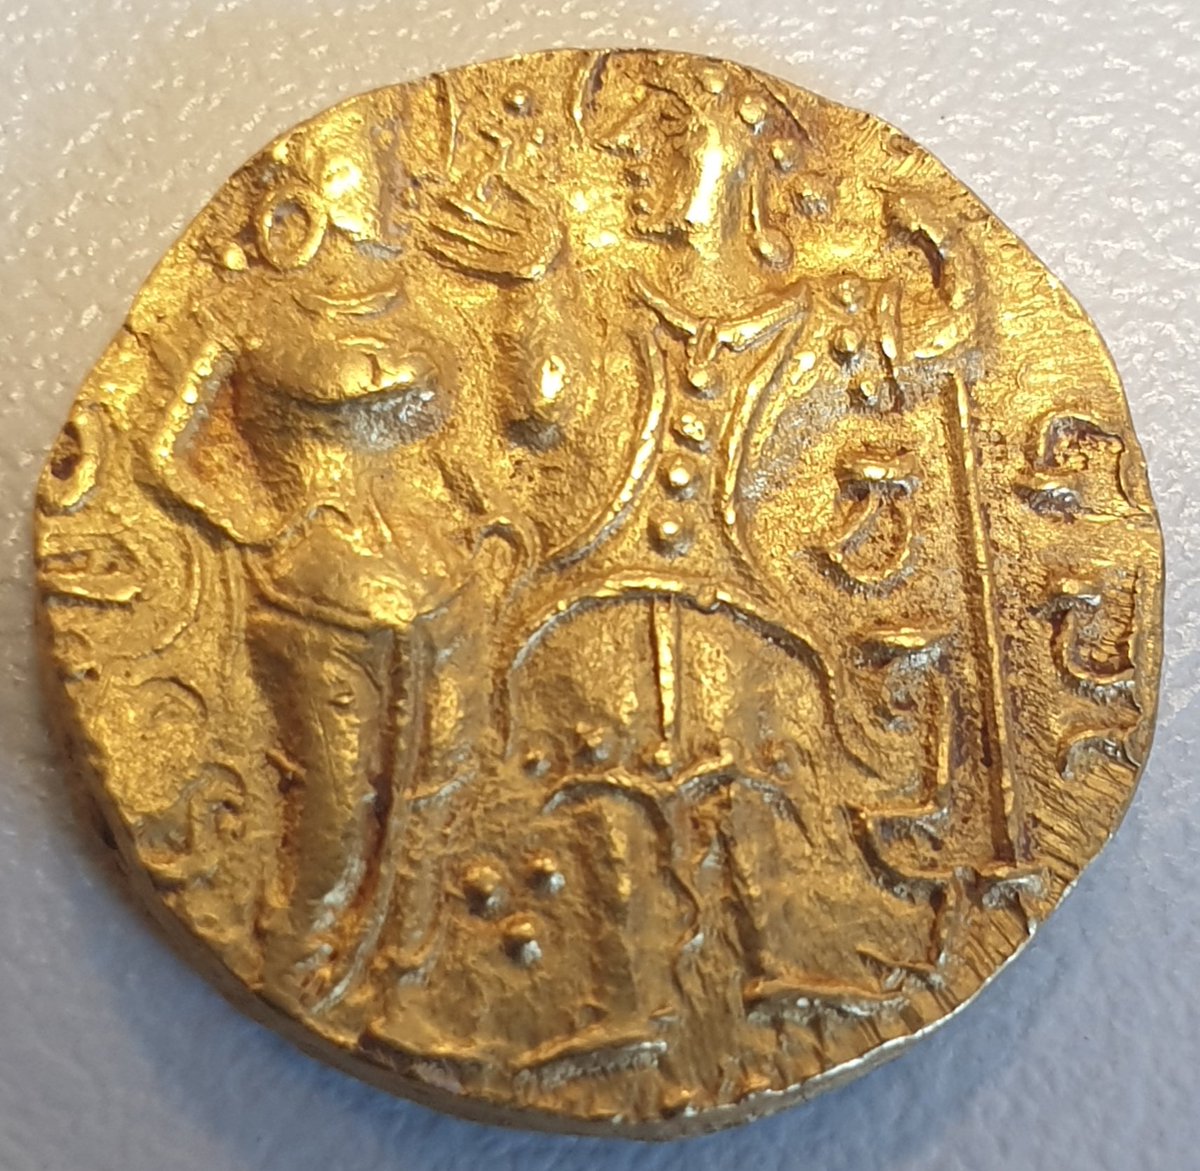 The gorgeous gold coinage of the Imperial Guptas: 1. Chandragupta I (r. 319-335 CE), who ruled UP, Bengal & Marwar as first Maharajadhiraja of the Guptas. His marriage to Lichchhavi princess Kumaradevi, seen with hoop earings, helped extend his power. Rear: Lakshmi on Lotus